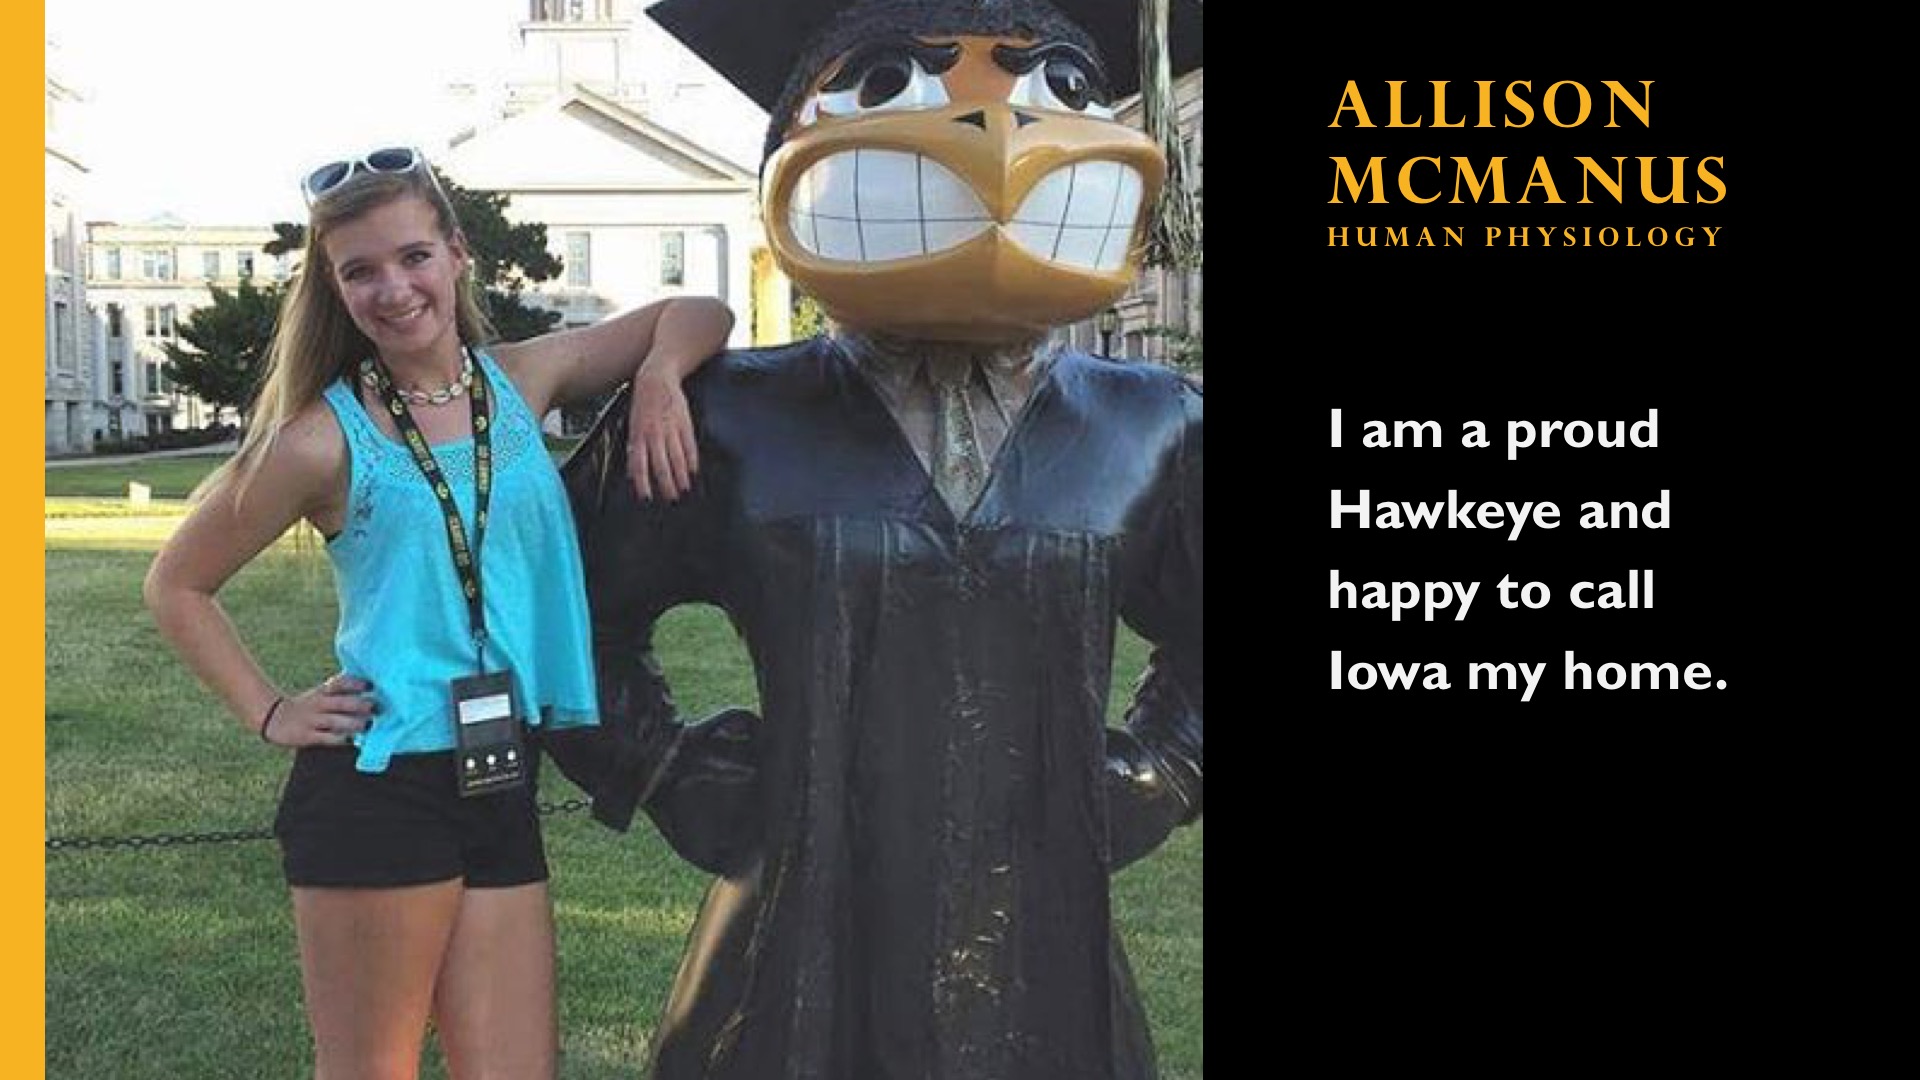 Allison Mcmanus. Human Physiology. I am a proud Hawkeye and happy to call Iowa my home. 